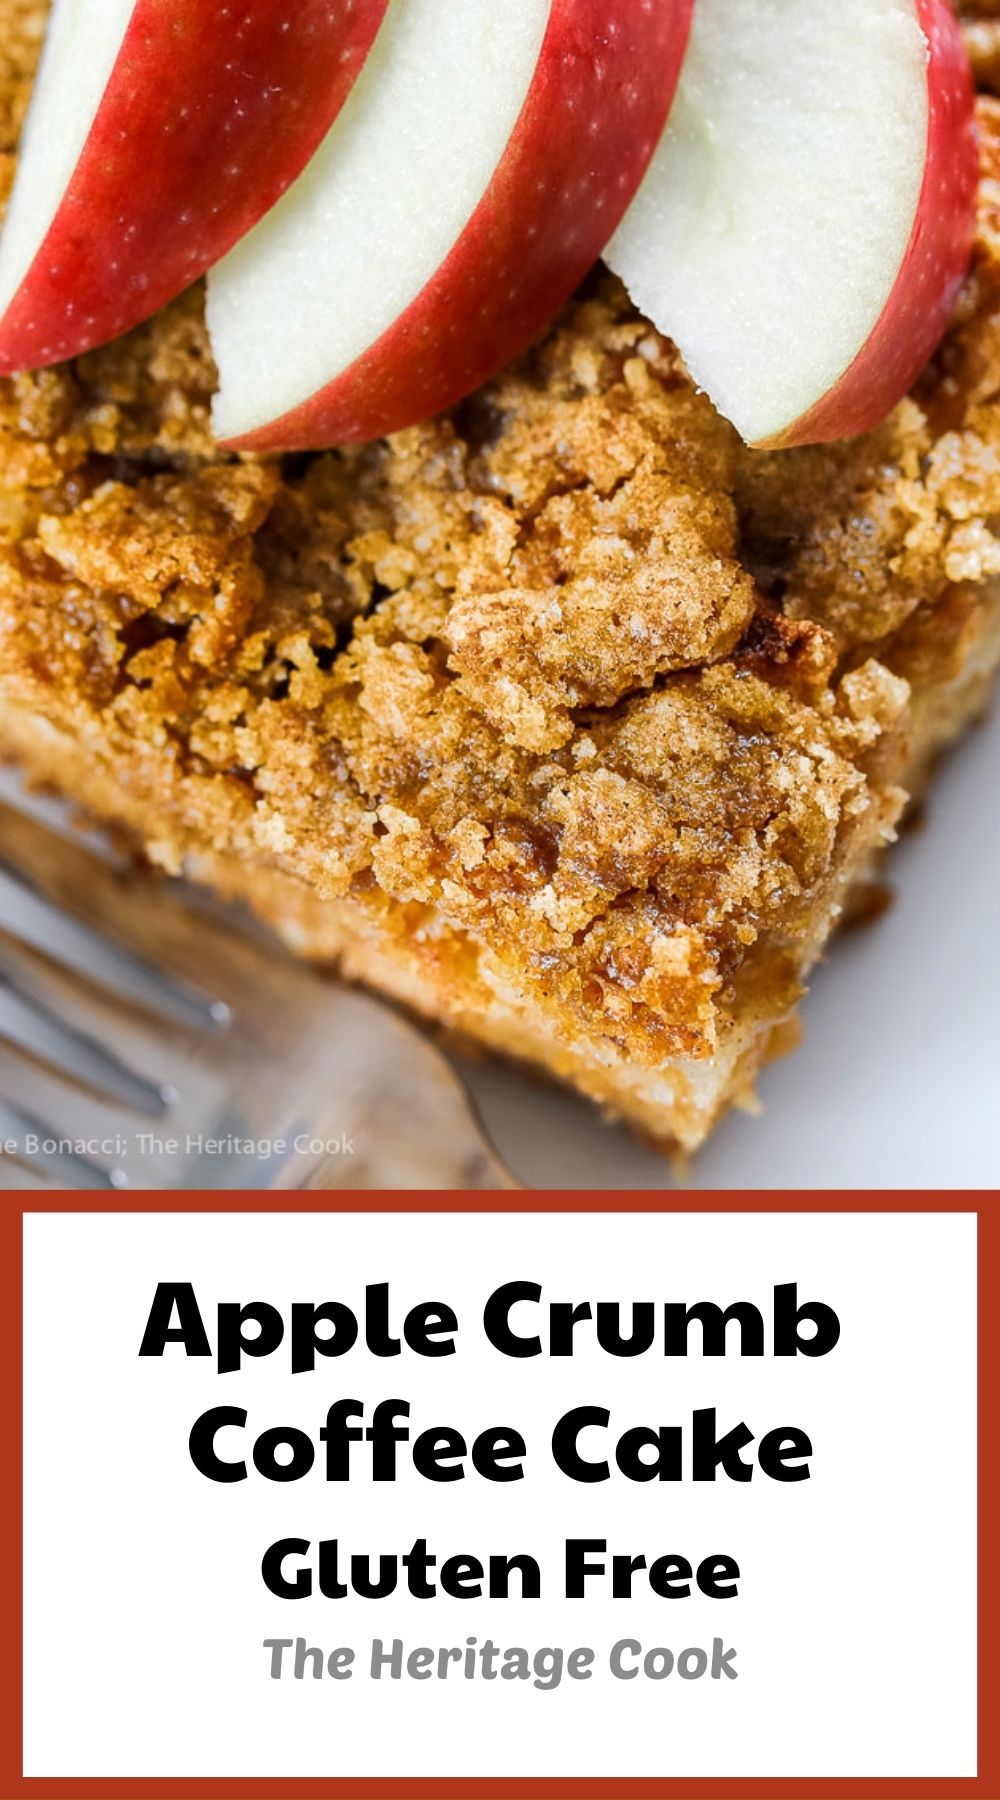 Apple Crumb Coffee Cake © 2021 Jane Bonacci, The Heritage Cook. All rights reserved.